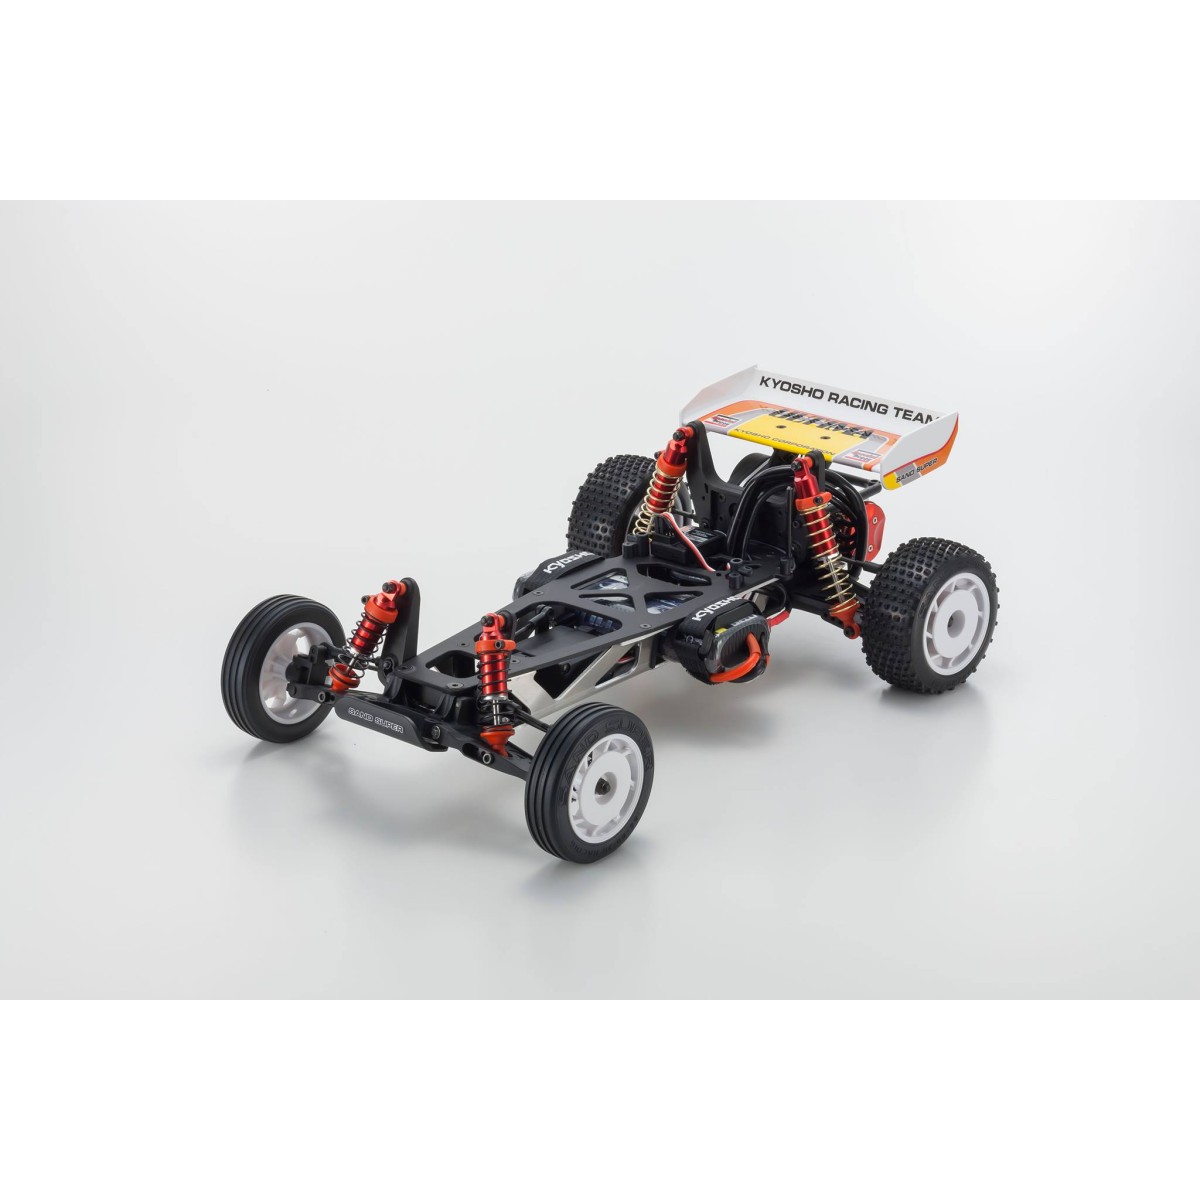 R/C 1:10 2WD Buggy Front and Rear wheel rim tire Rc car For kyosho 30625 30616